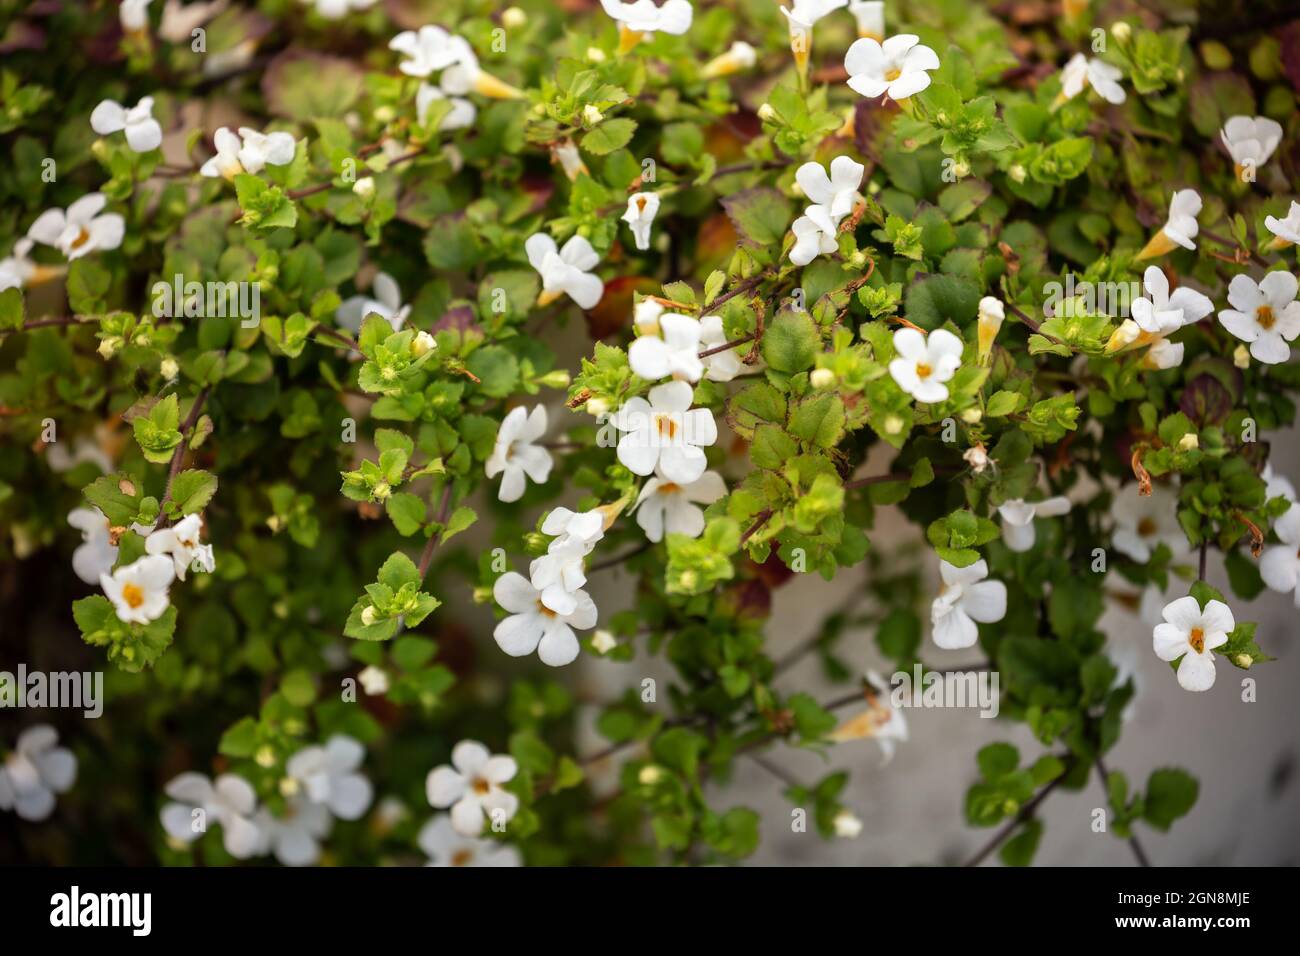 Sutera cordata (Chaenostoma cordatum) or ornamental bacopa ornamental plant with small white flowers and creeping drooping stems Stock Photo